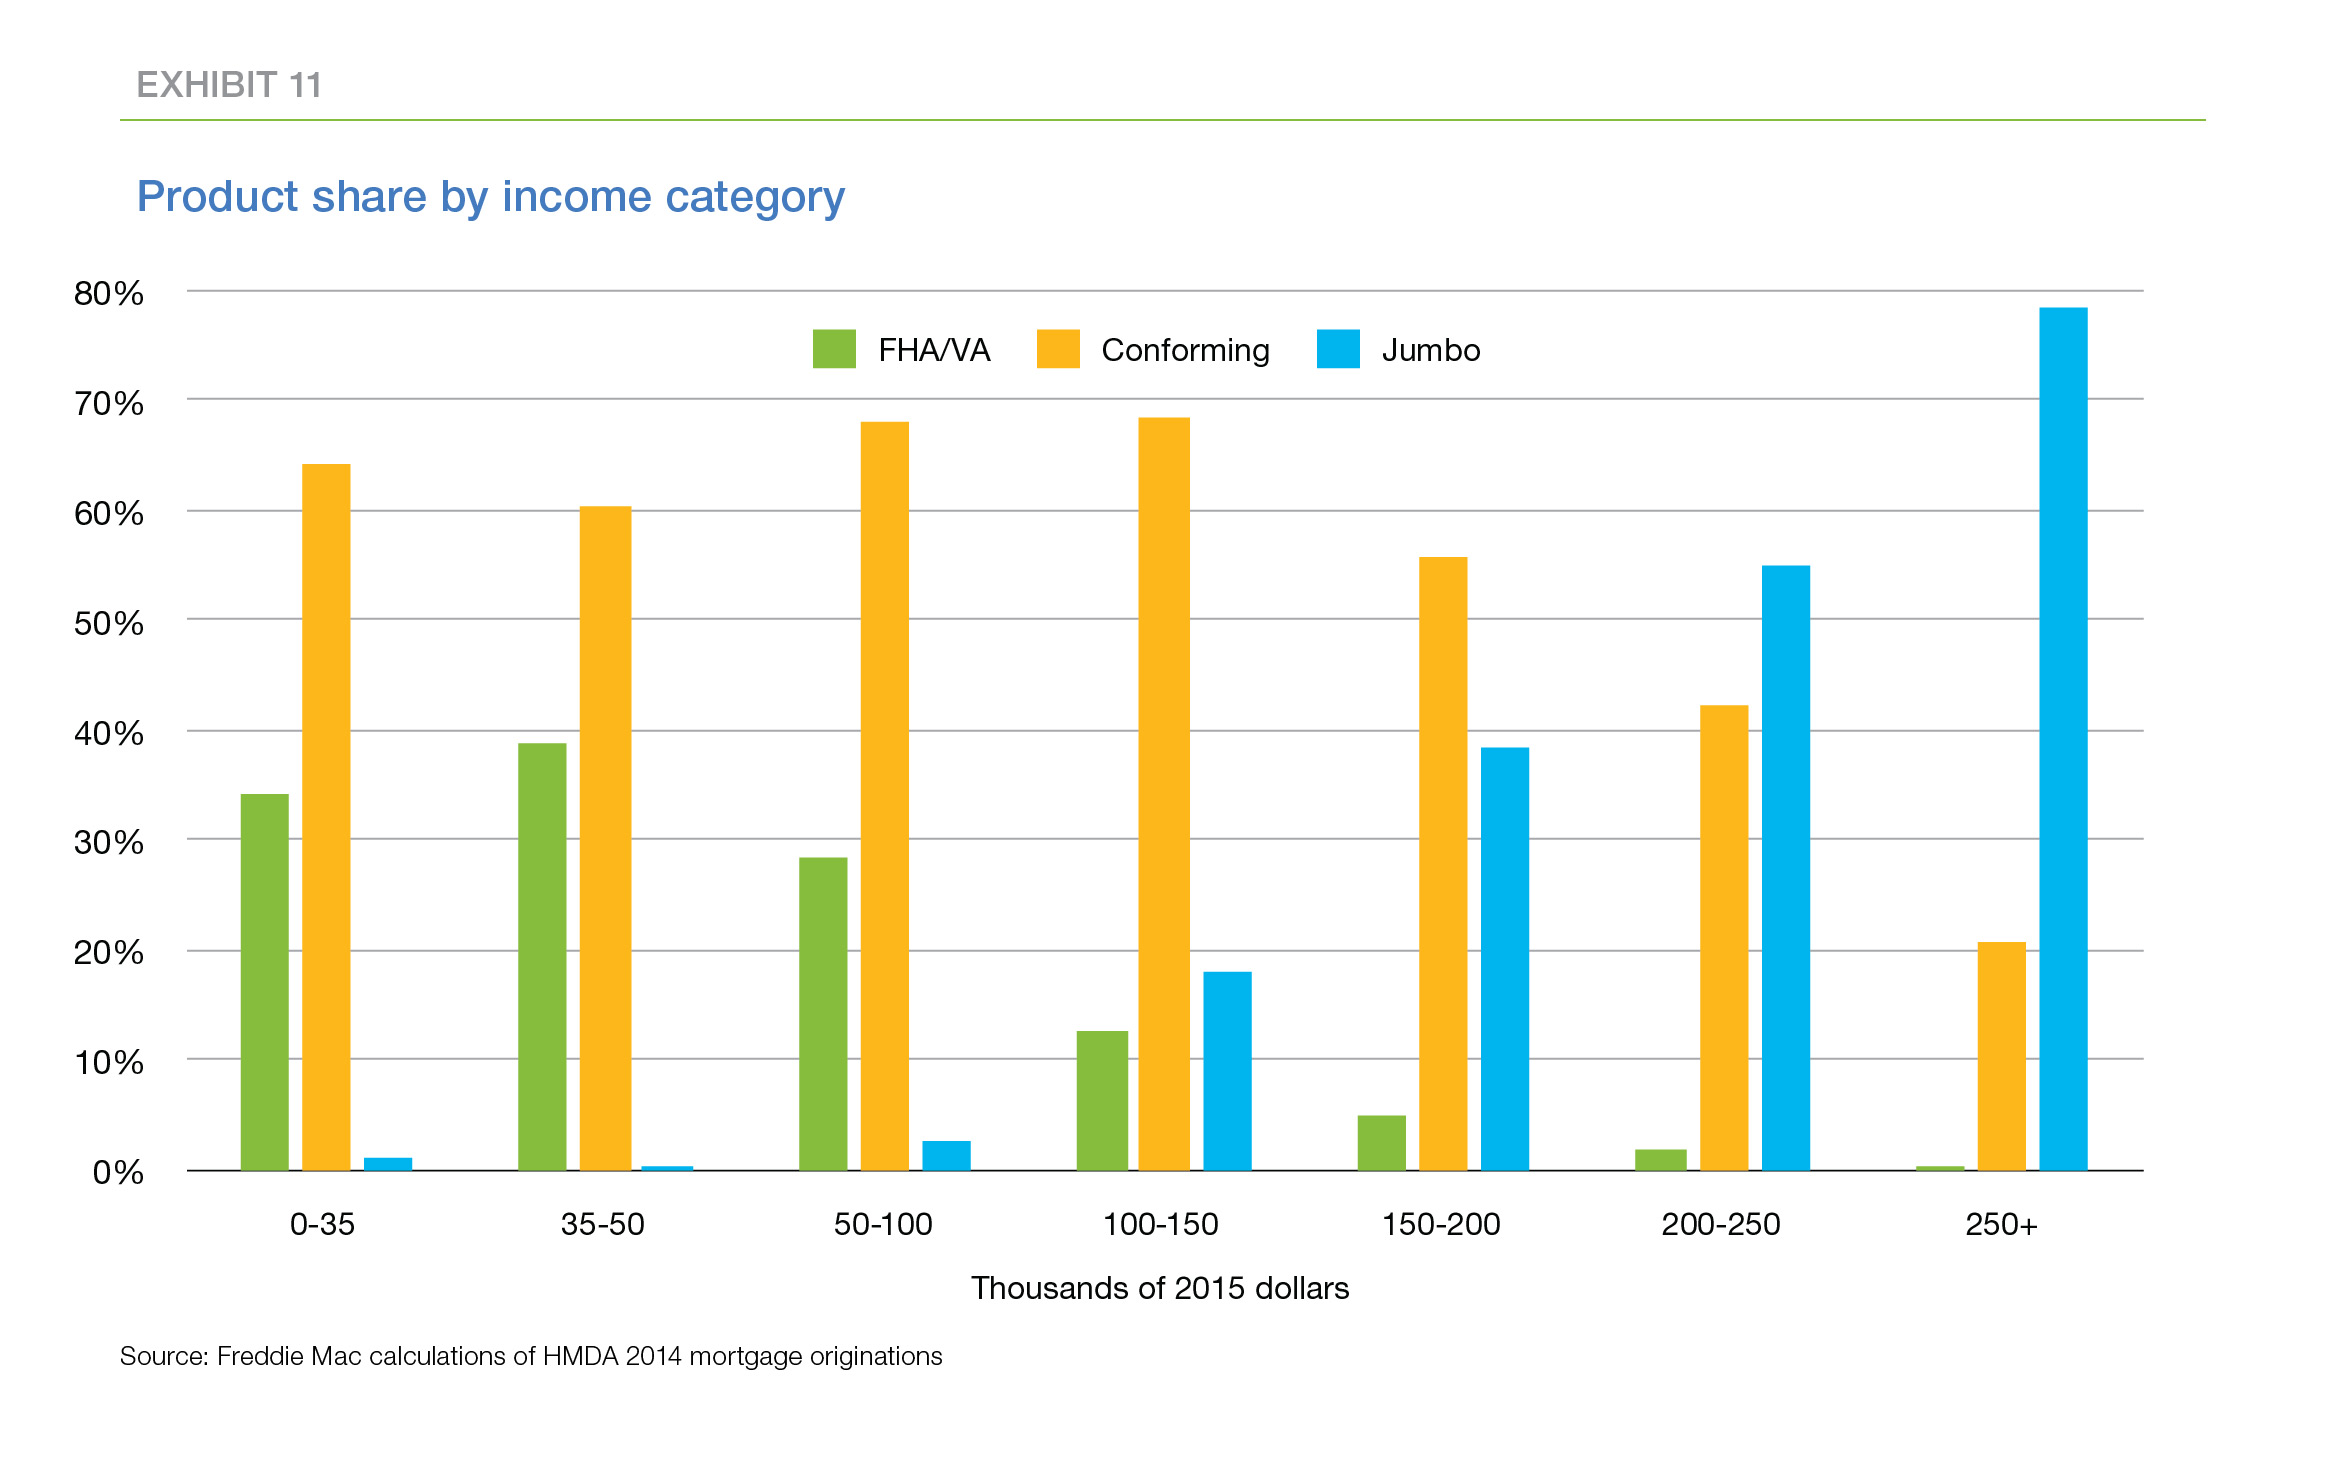 Color bar chart showing product share by income category between FHA/VA, Conforming and Jumbo